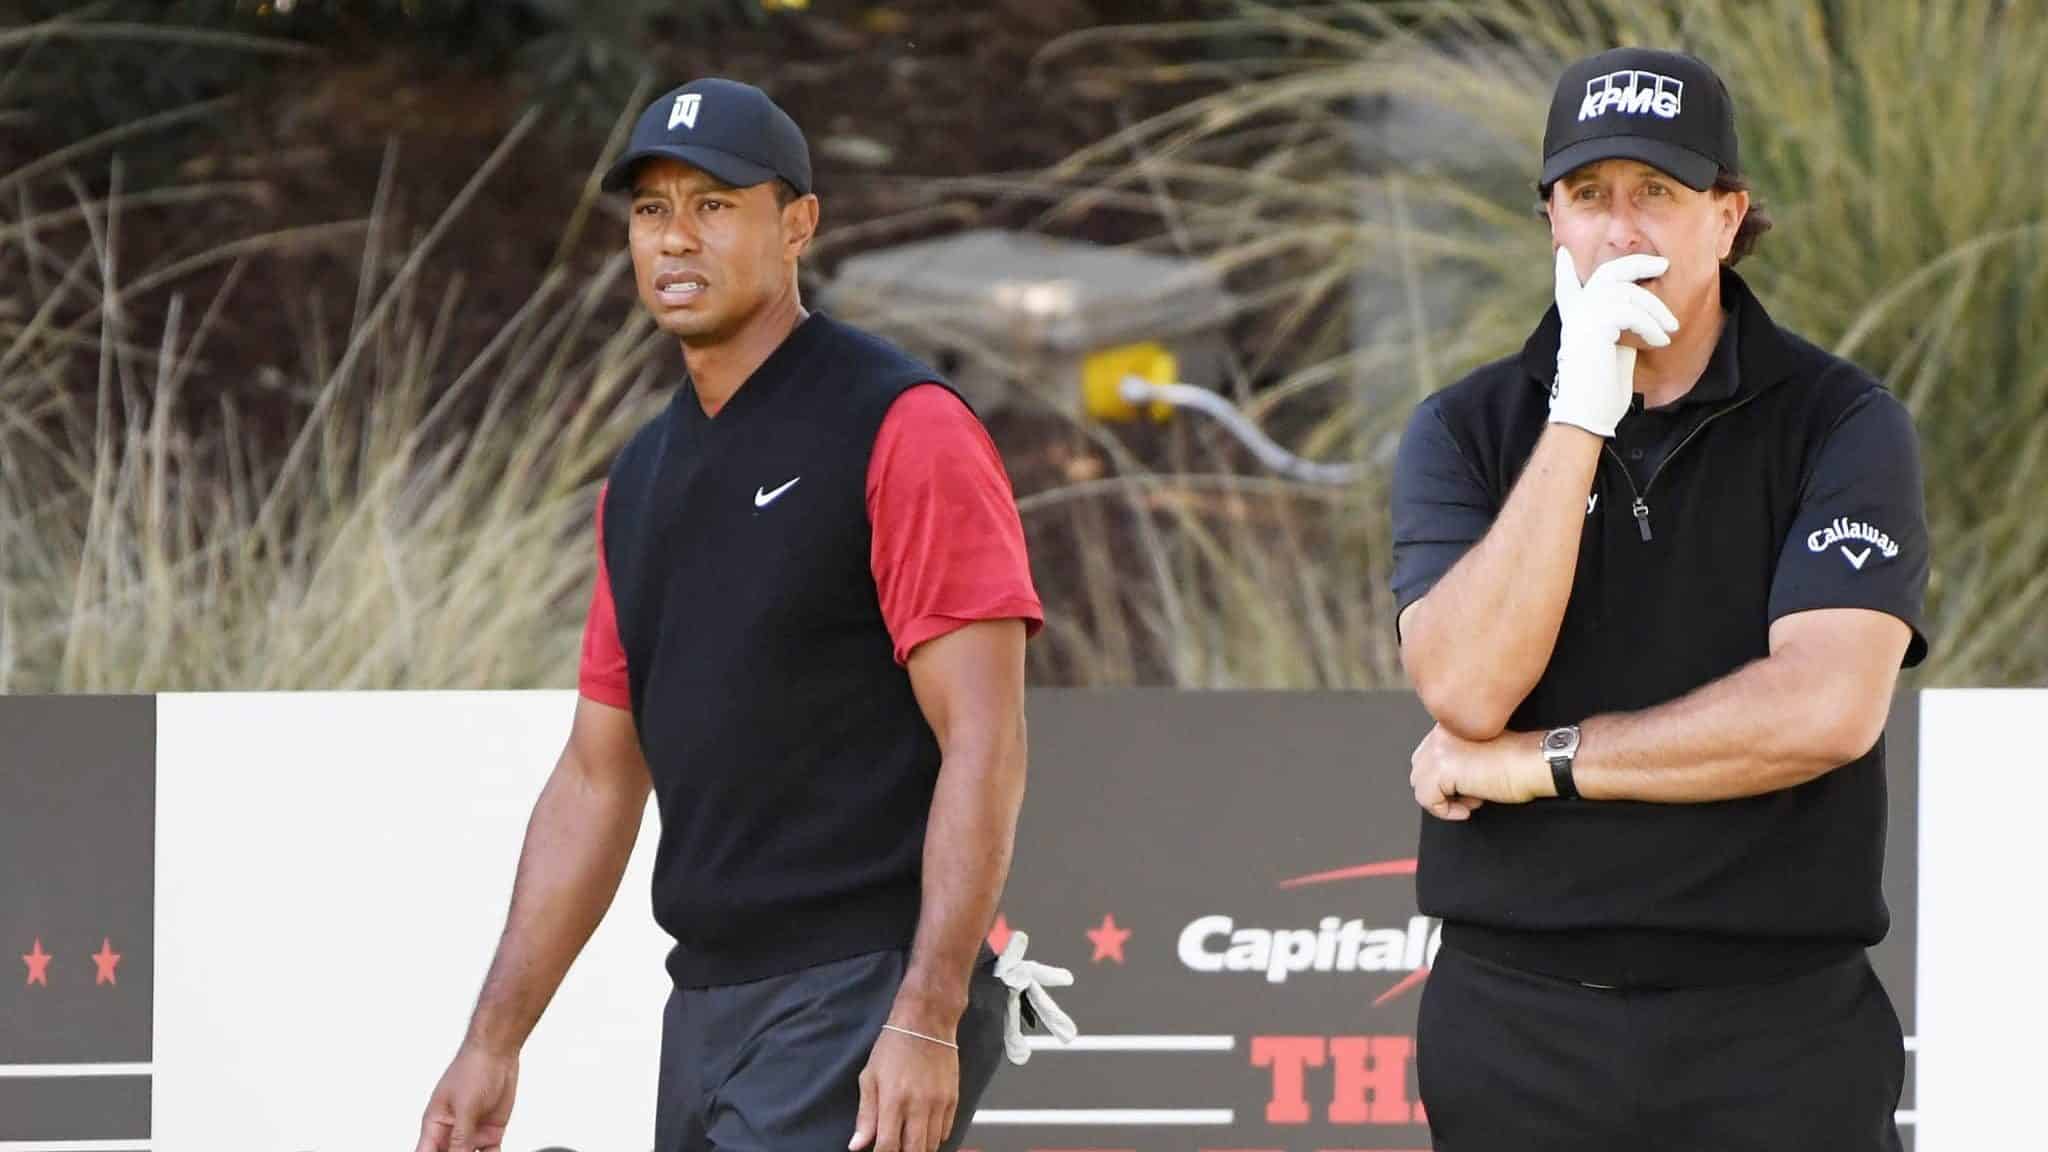 LAS VEGAS, NV - NOVEMBER 23: Tiger Woods and Phil Mickelson look on from the seventh tee during The Match: Tiger vs Phil at Shadow Creek Golf Course on November 23, 2018 in Las Vegas, Nevada.